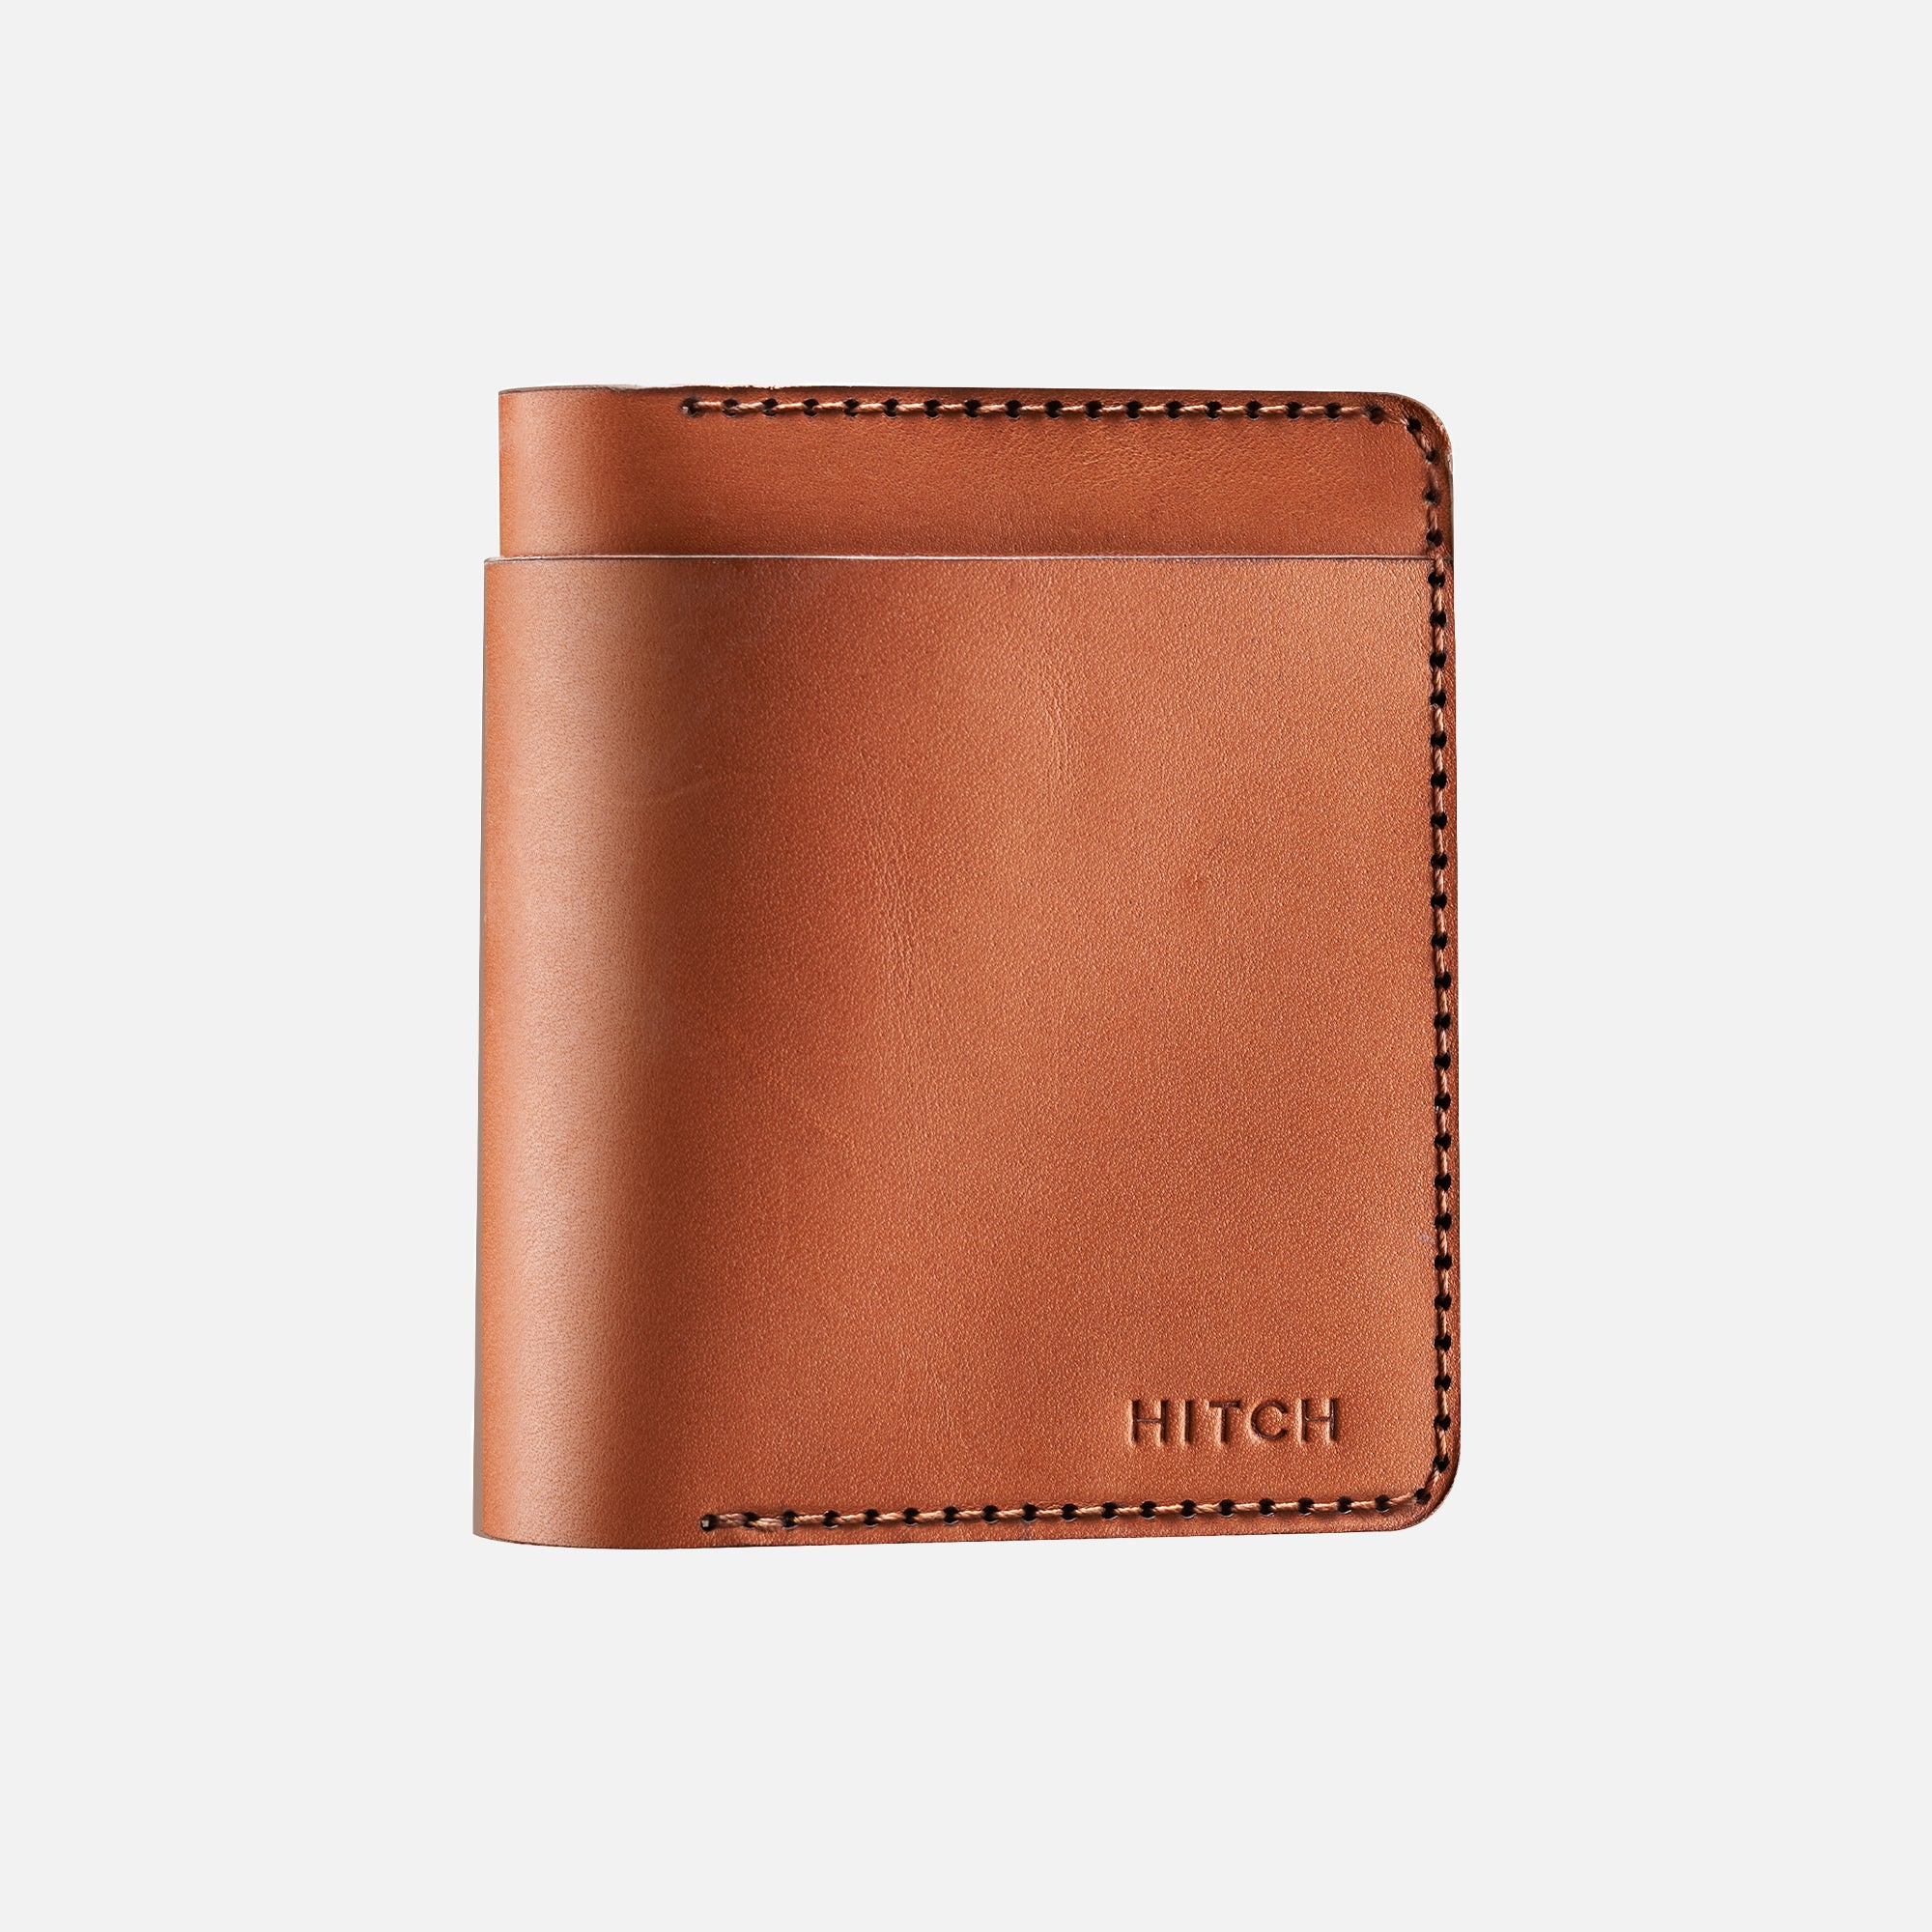 Brown leather bifold wallet with stitching detail and embossed HITCH" logo on a white background.